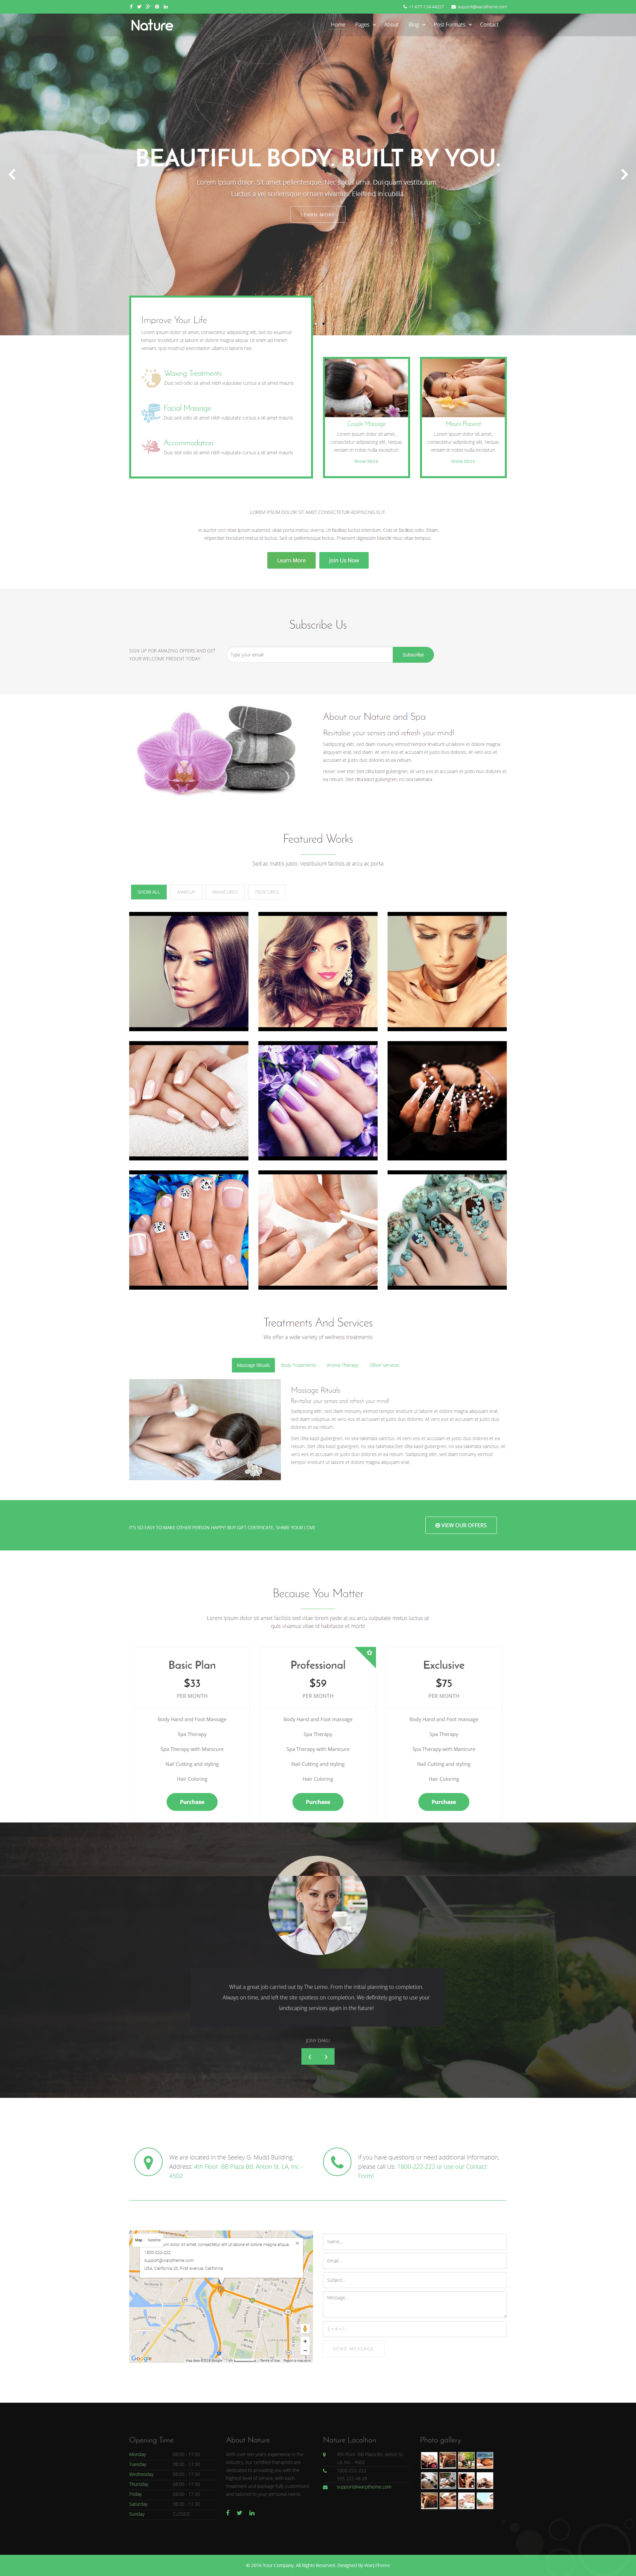 Adult Site Template 62